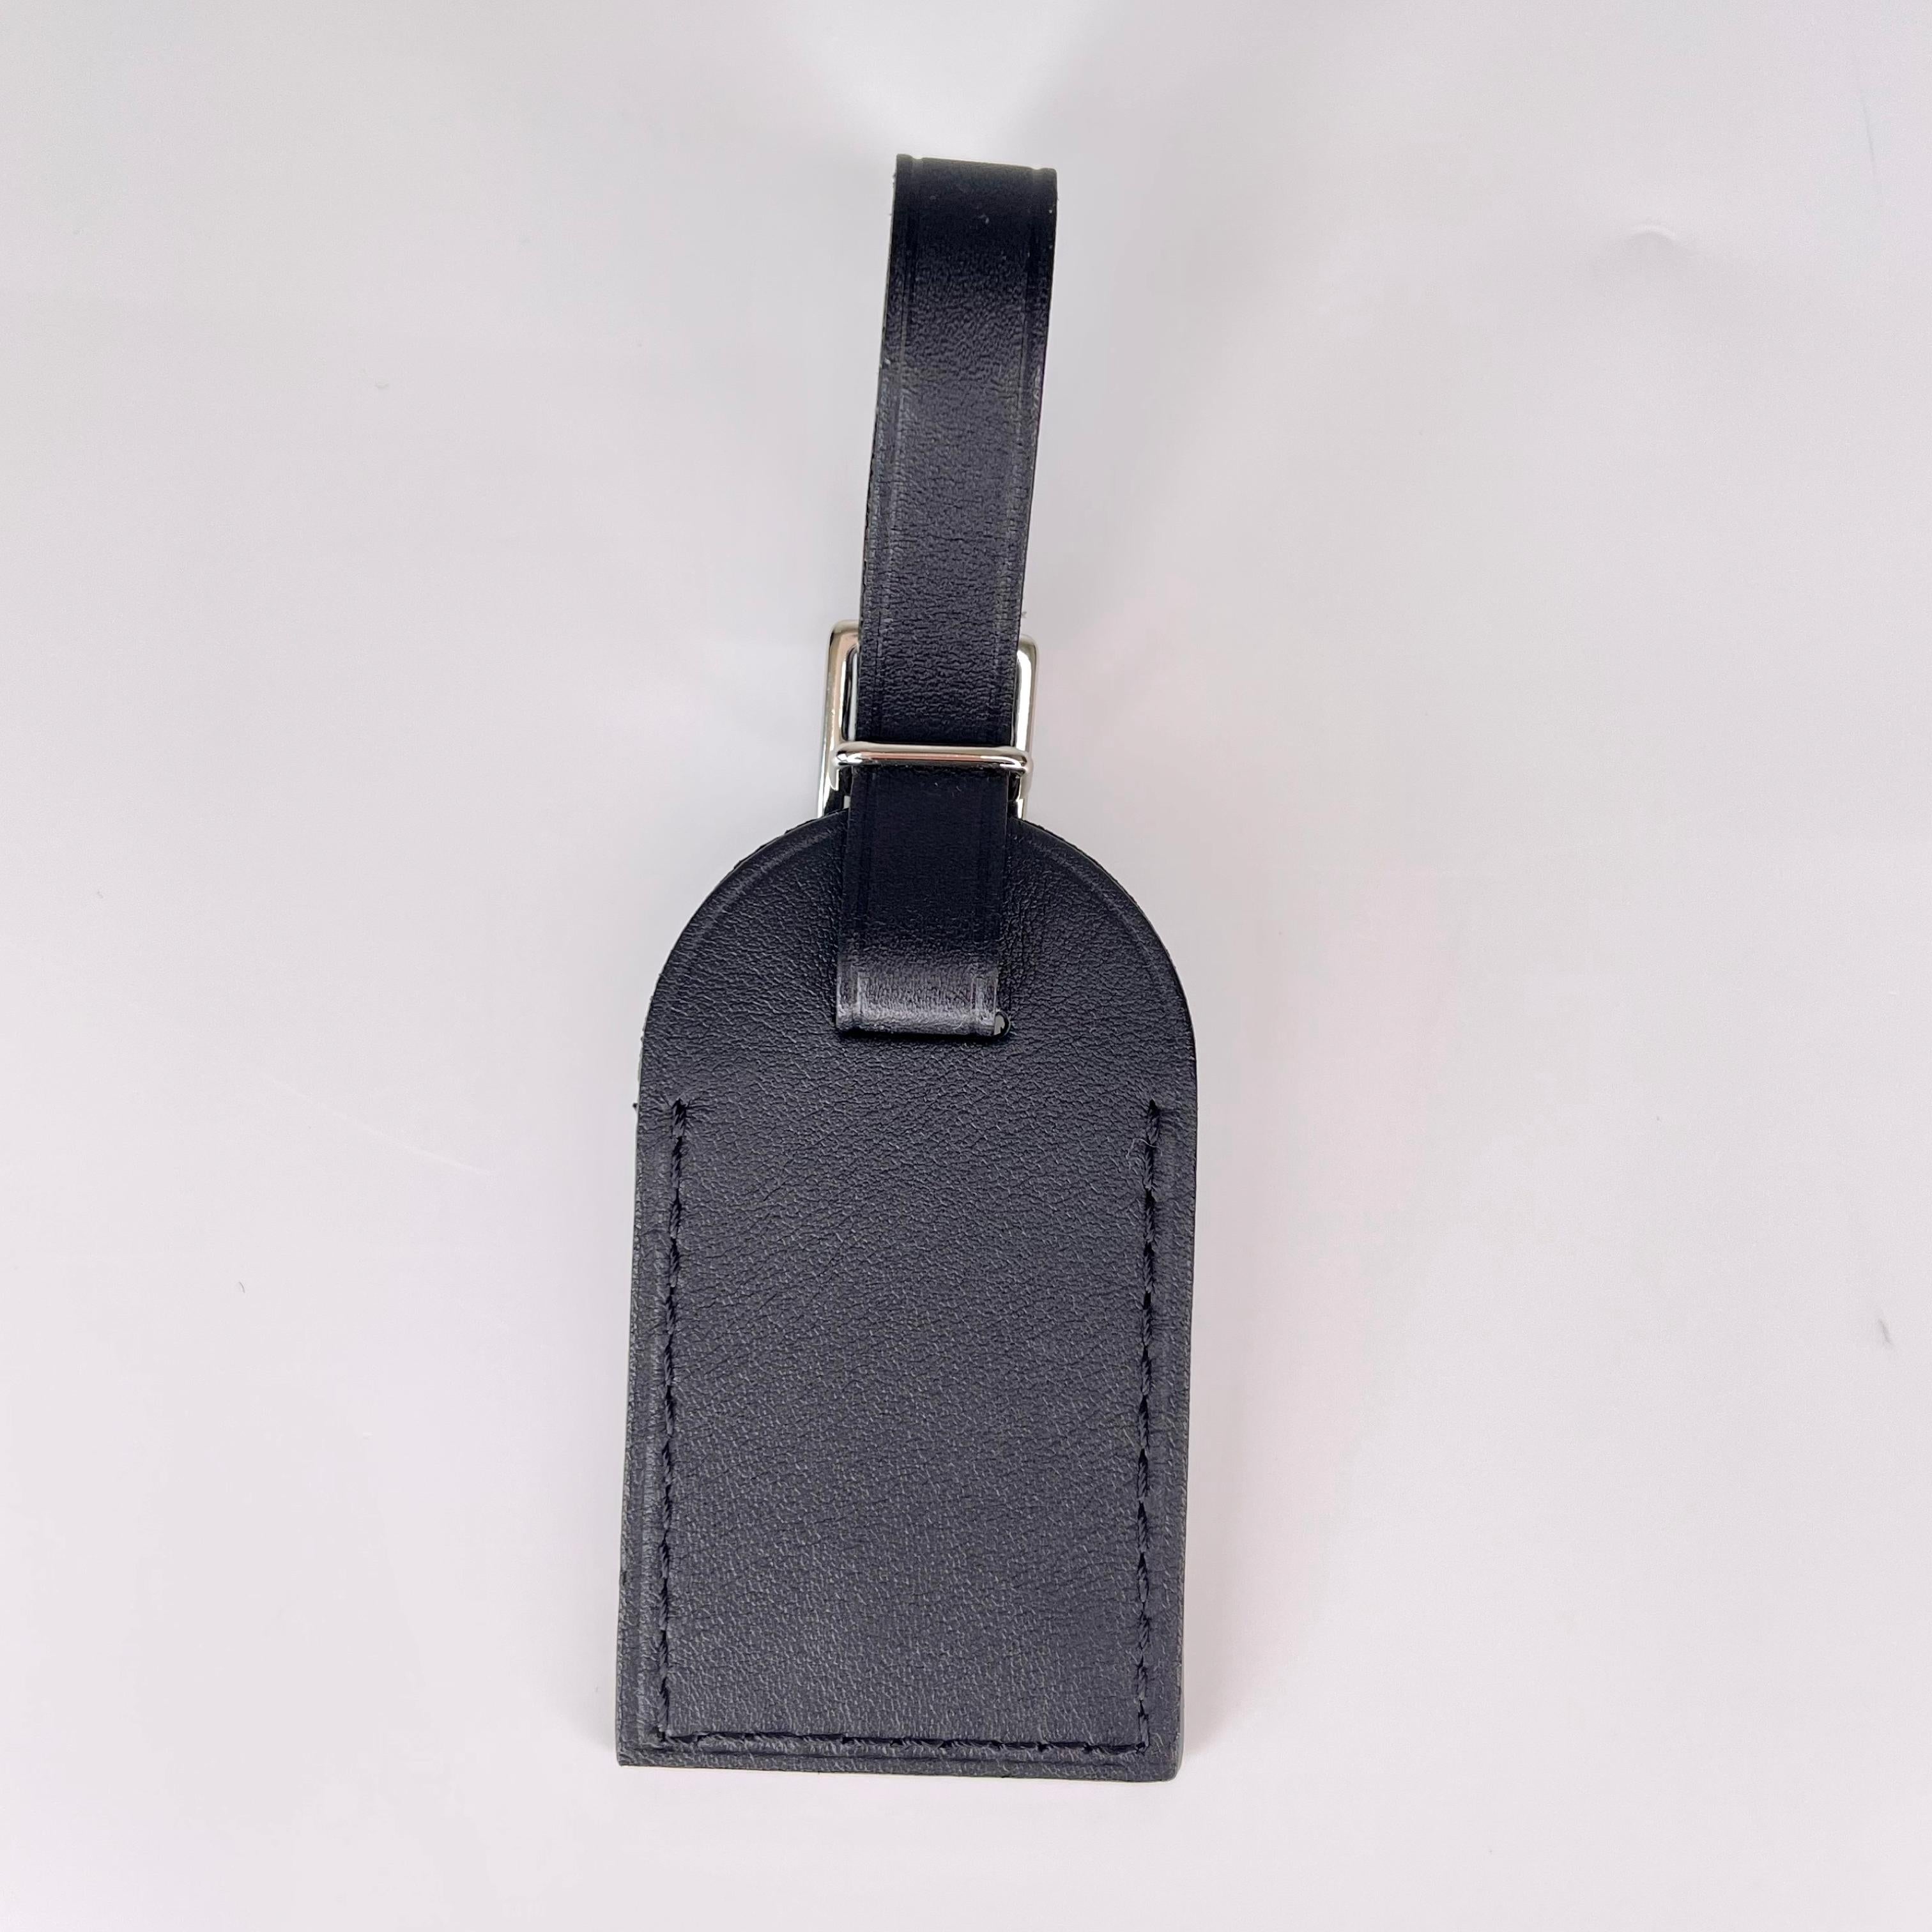 This Louis Vuitton luggage tag is small, chic and a great travel accessory. Made of calfskin leather, and remains in very good condition.

COLOR: Black
MATERIAL: Calfskin
MEASURES: L 2.5” x W 1.5”
COMES WITH: Dustbag, orange box, care